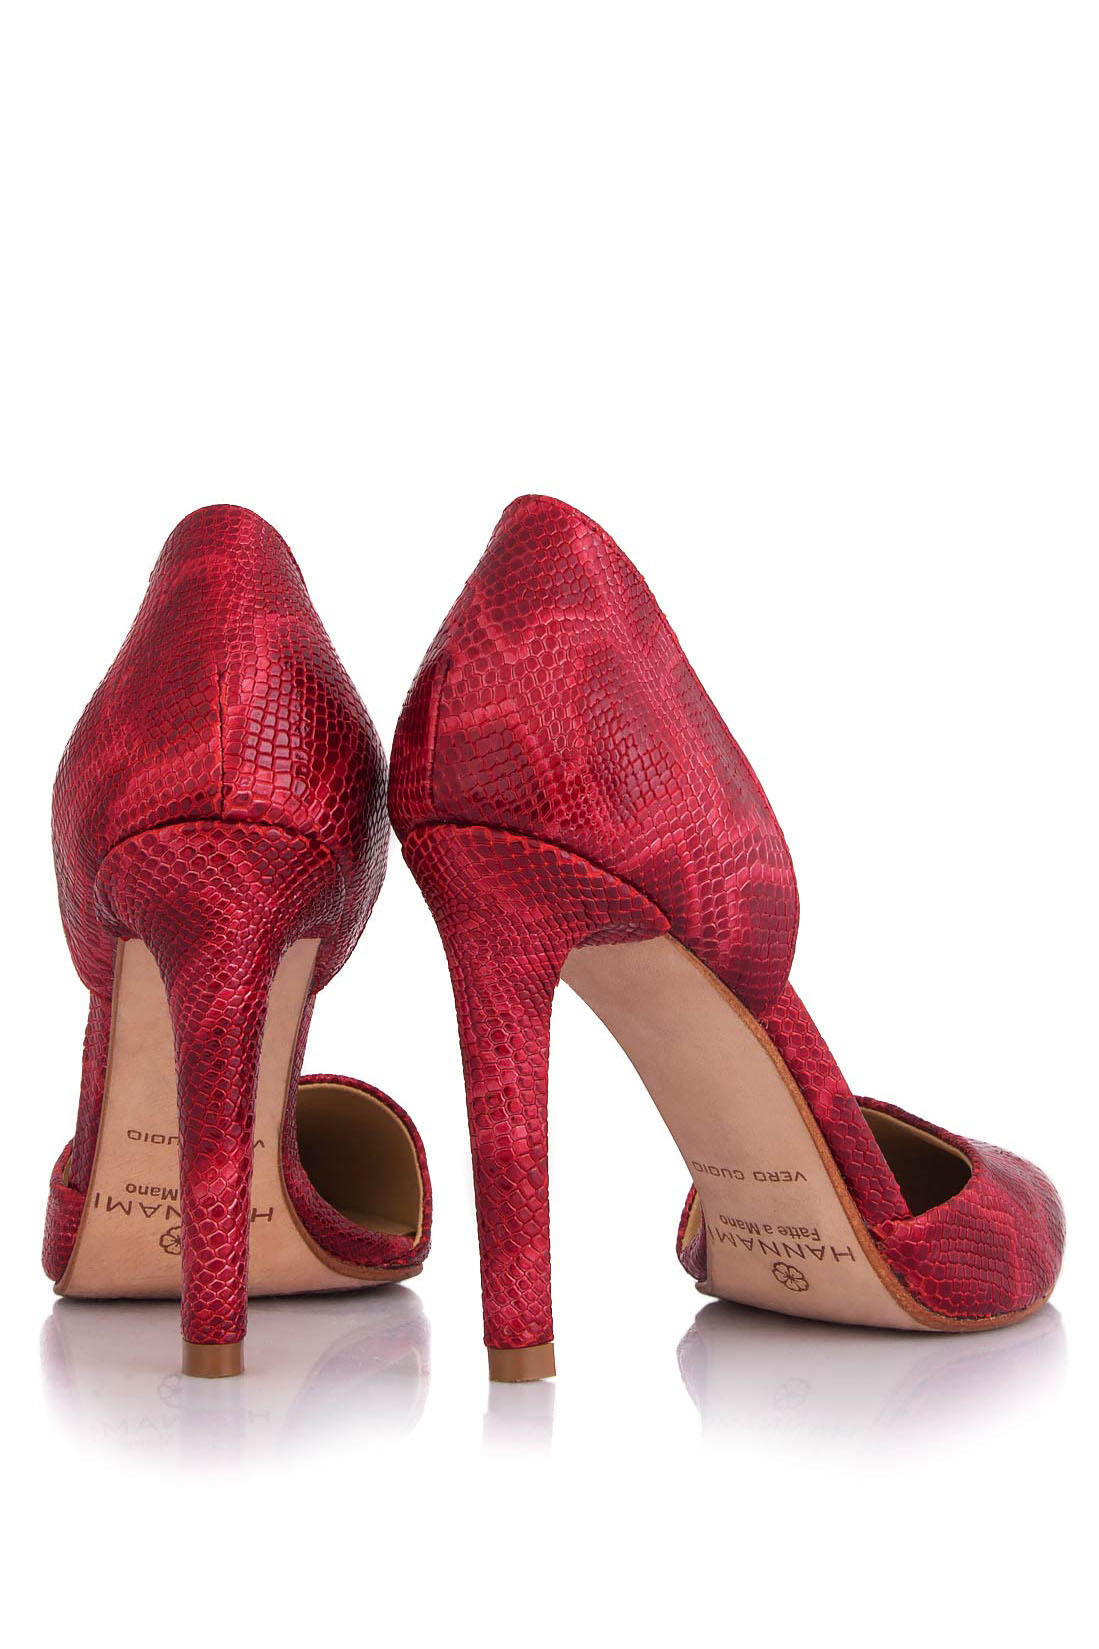 'Forever Marlyne' textured-leather pumps Hannami image 2